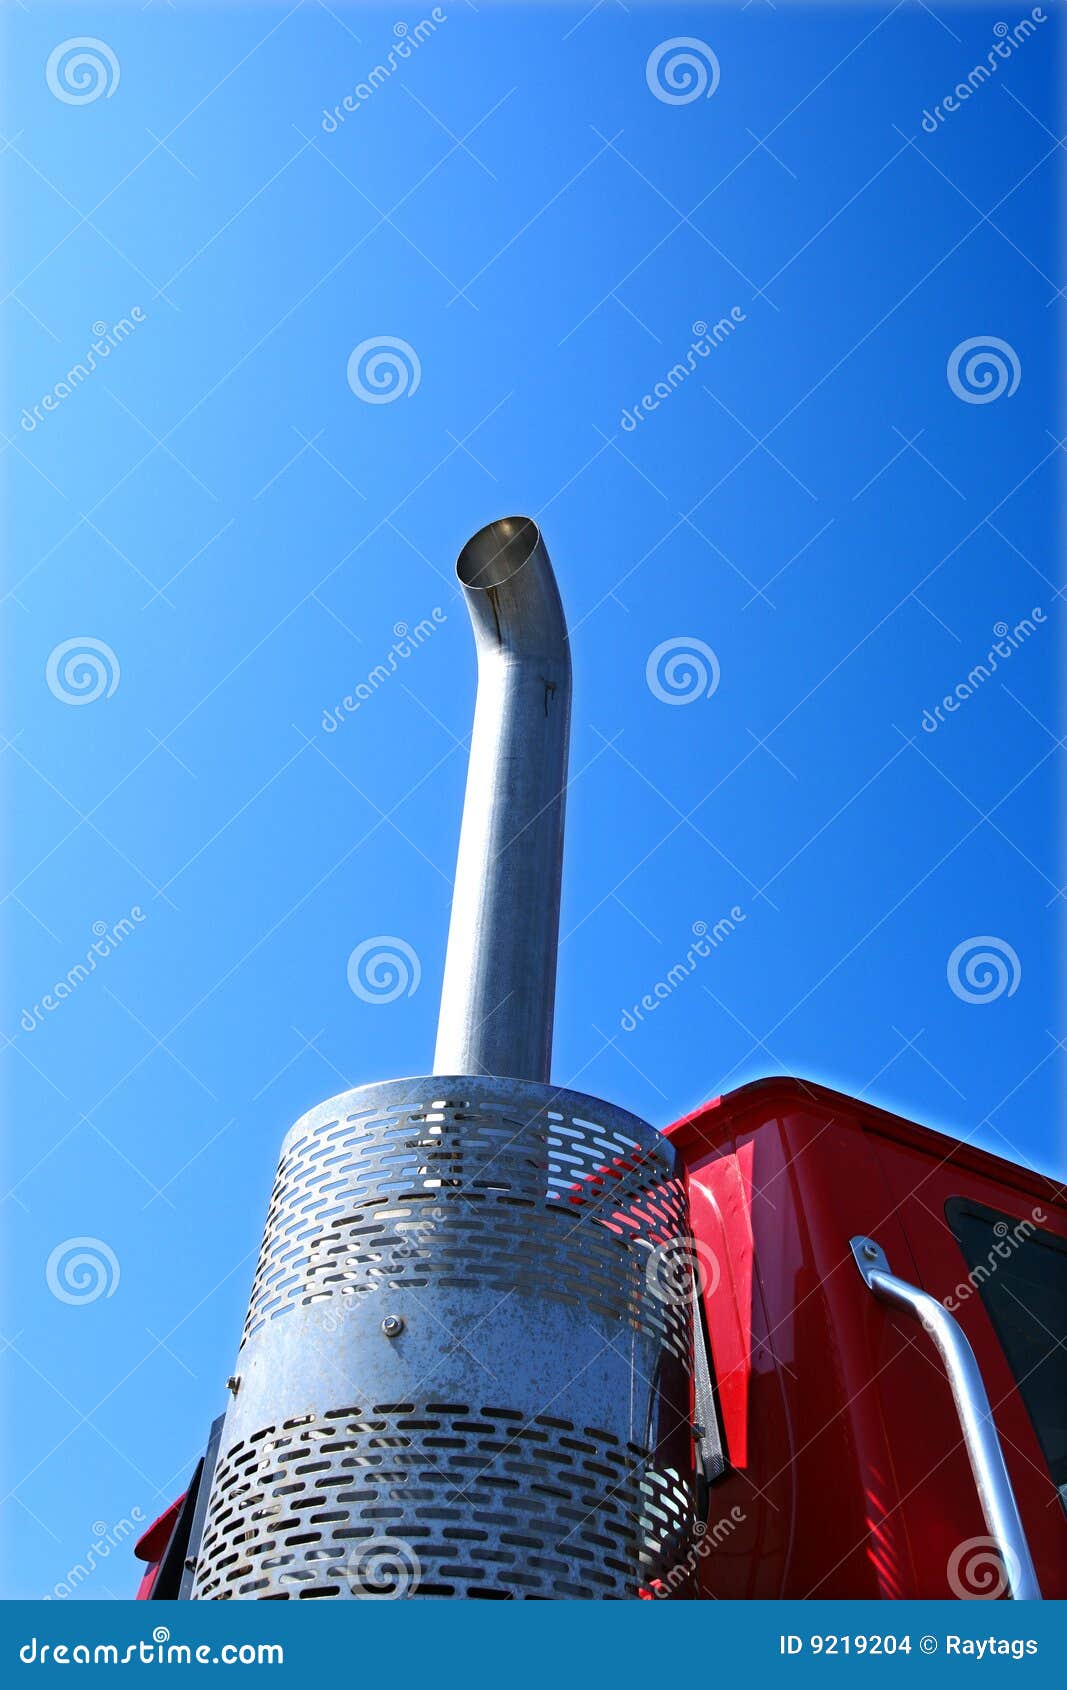 Truck exhaust pipe stock photo. Image of indicator, carbon - 9219204